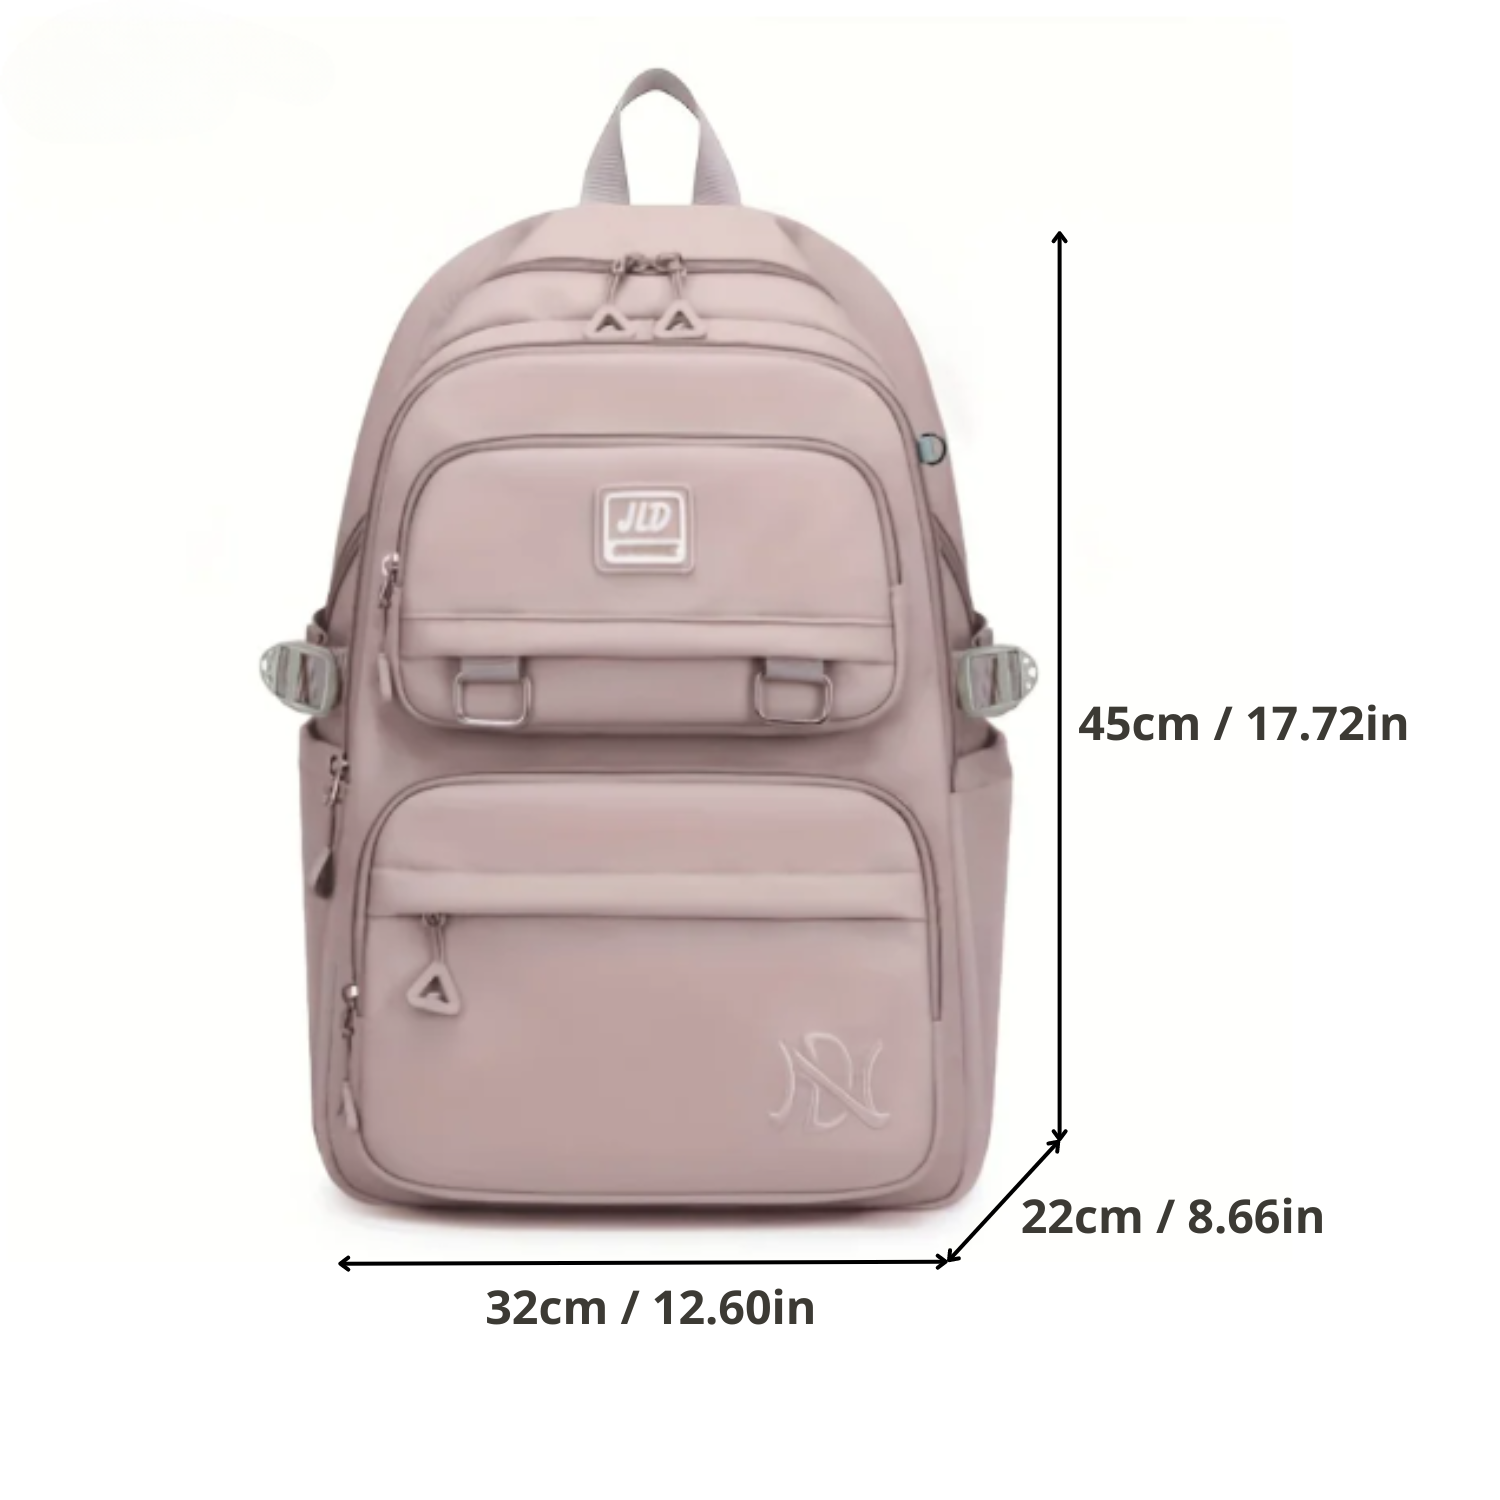 Urban Chic Large Capacity Backpack - Sleek and Durable